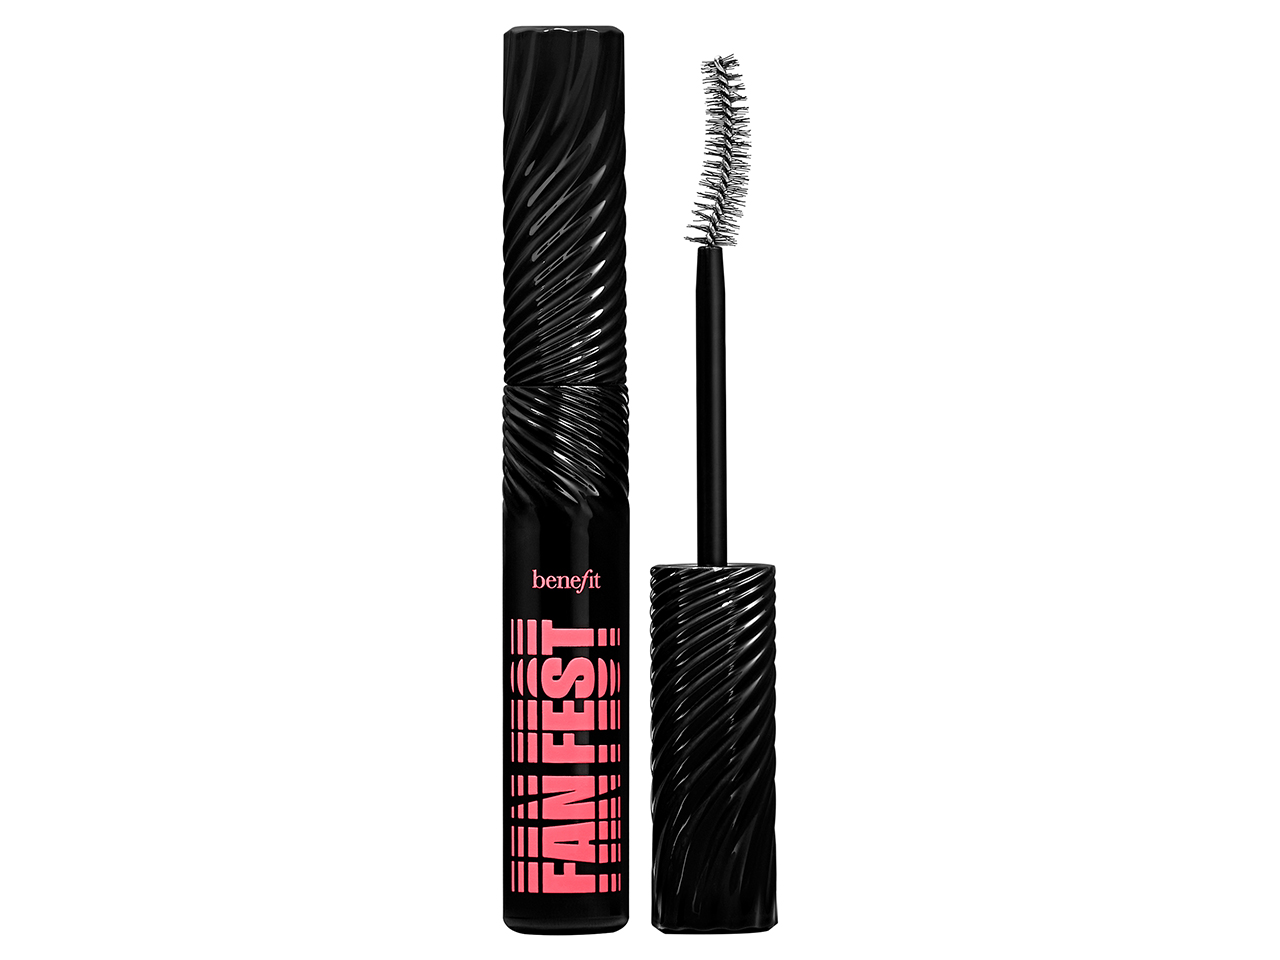 A tube of best new beauty product for July 2023 Benefit Cosmetics Fan Fest Fanning & Volumizing Mascara.